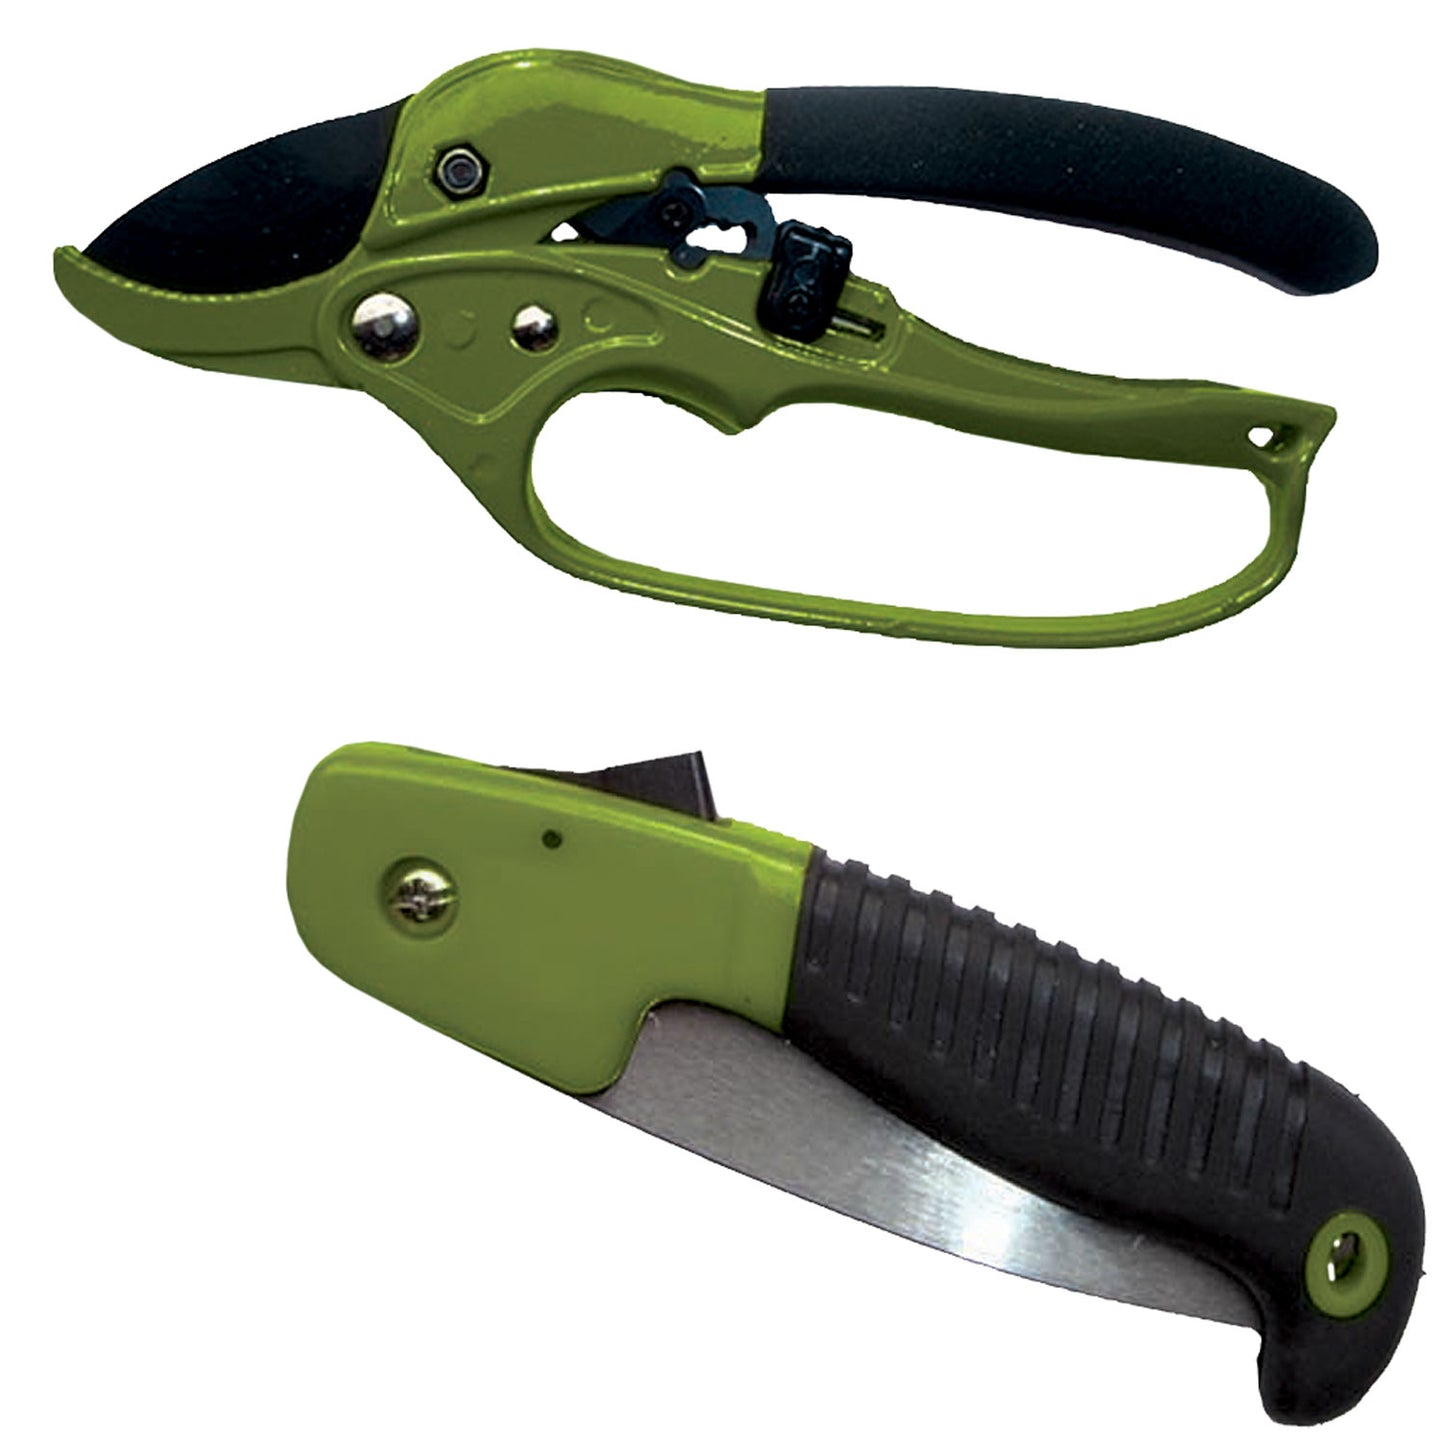 HME Hunter's Combo Pack 7" Folding Saw Polymer Black with Shears